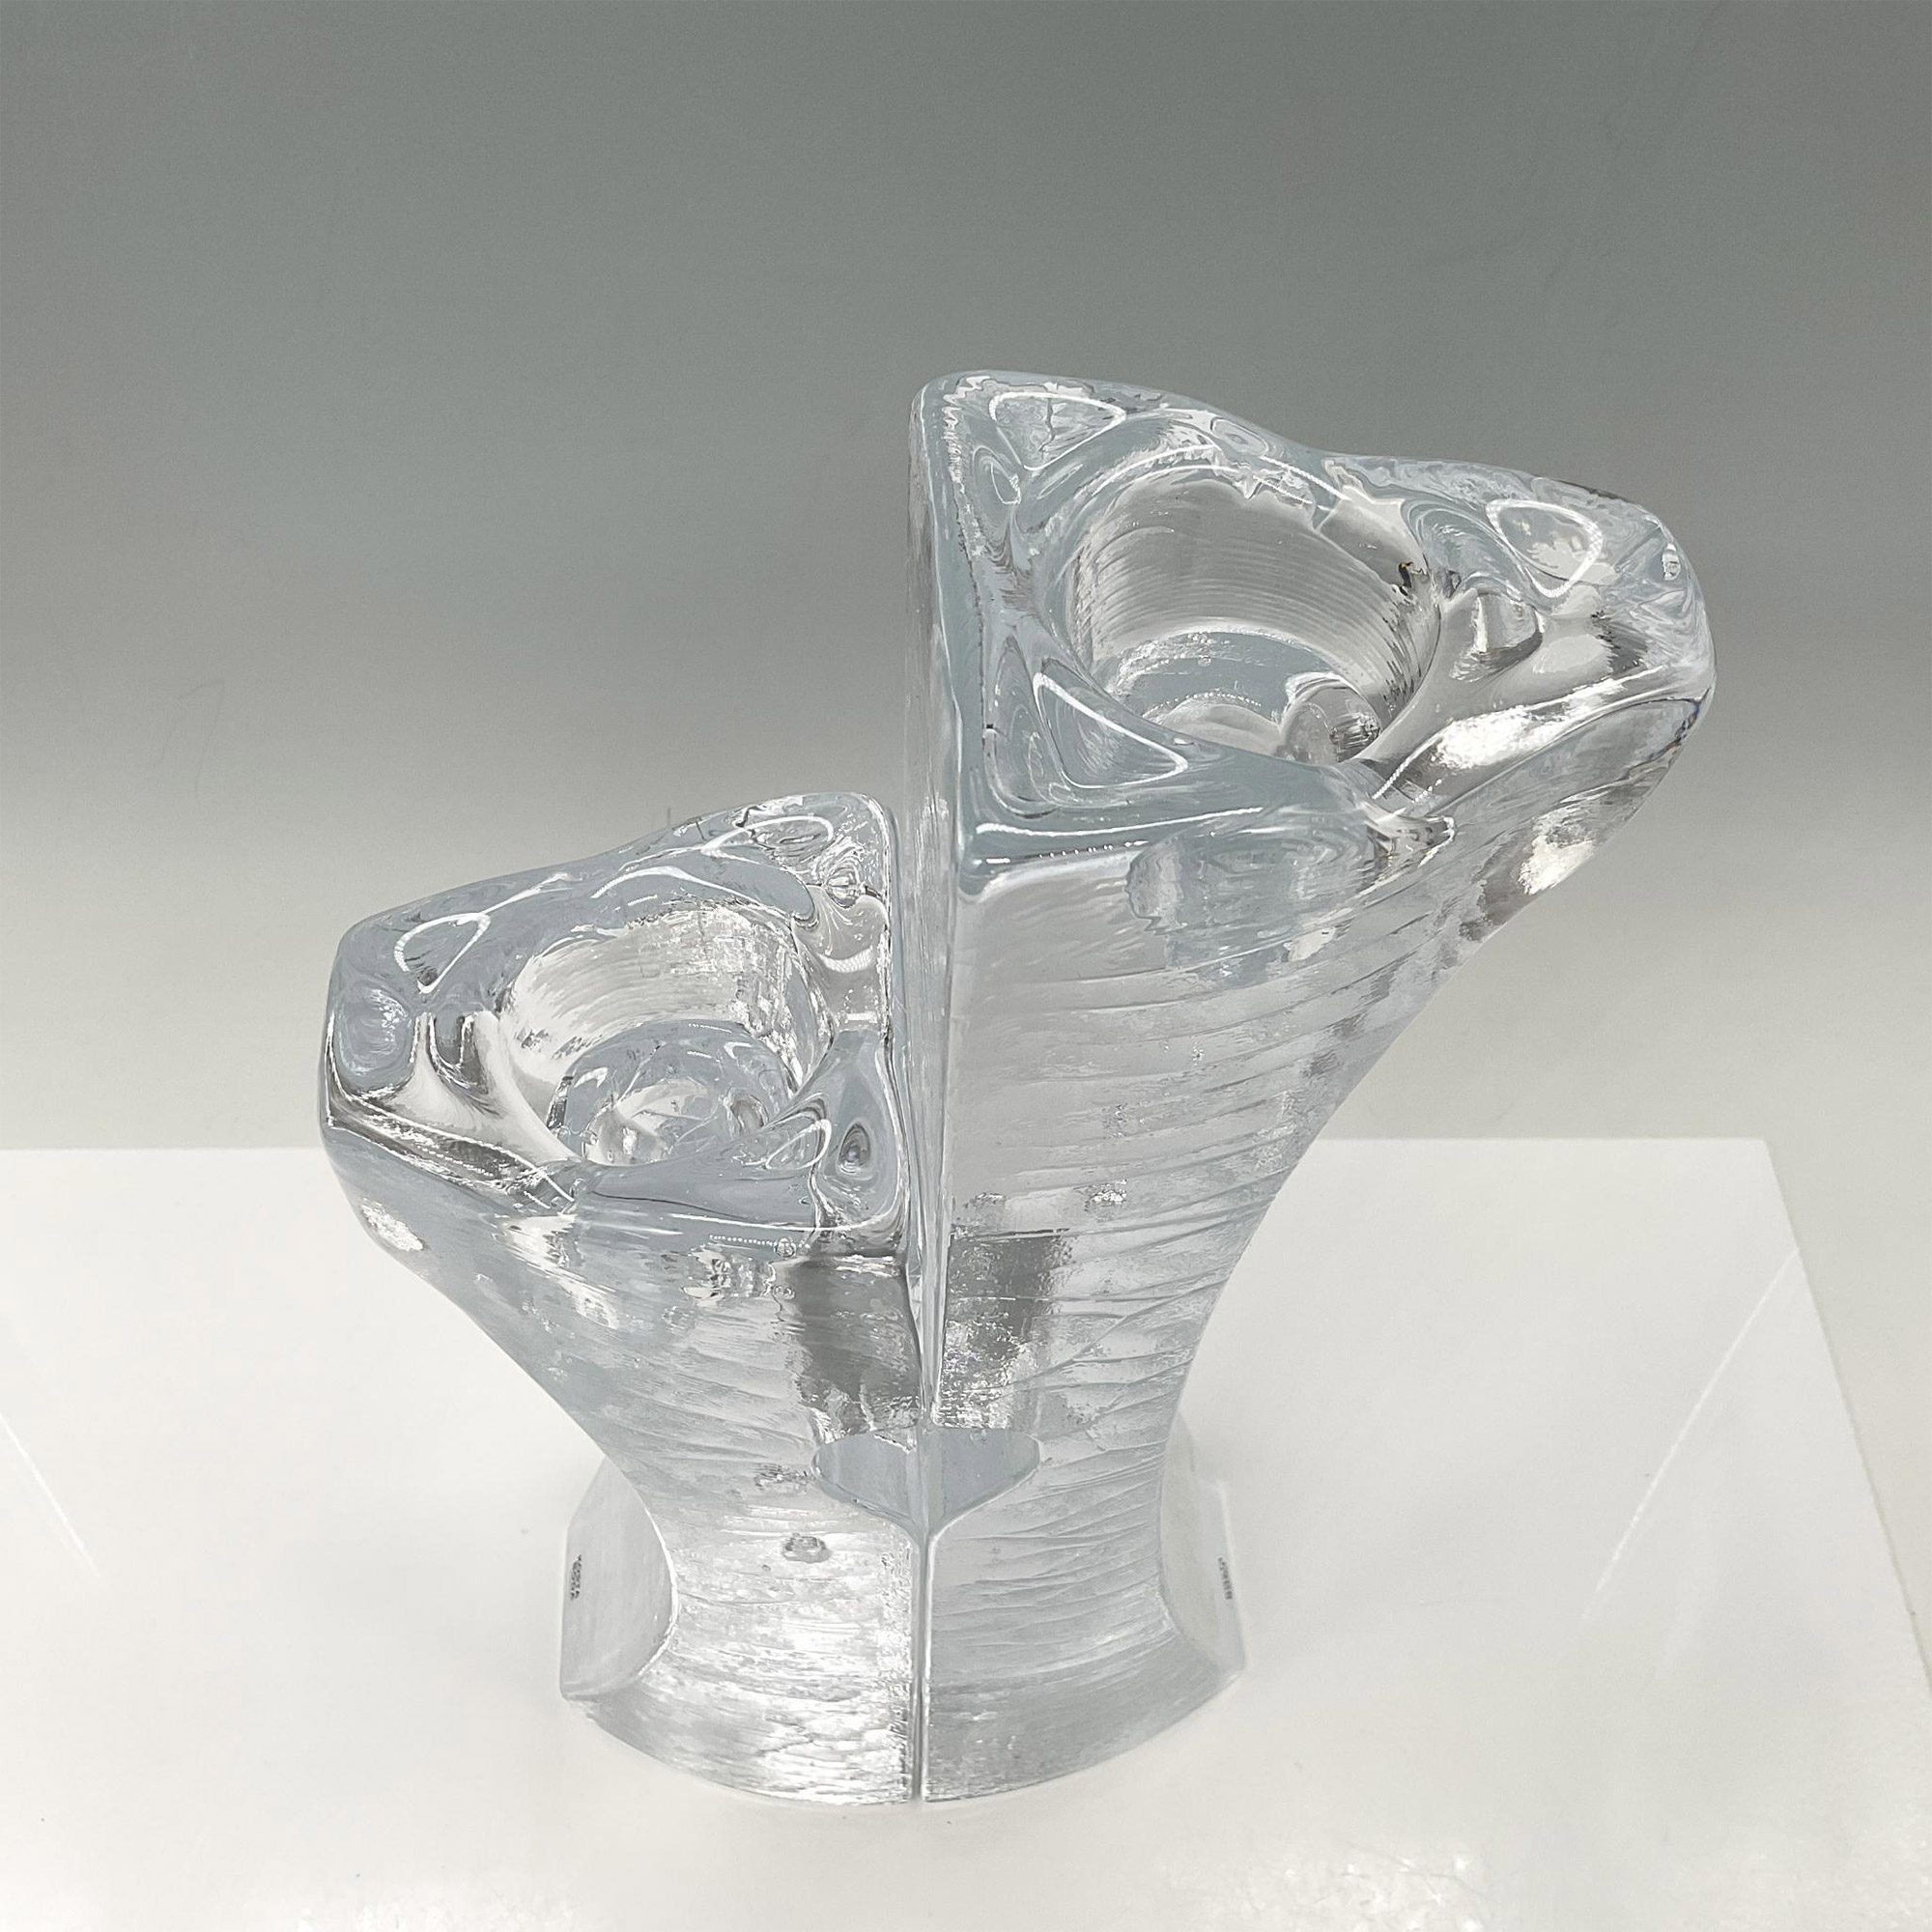 2pc Kosta Boda Crystal Candle Holders, Connect - Image 2 of 5